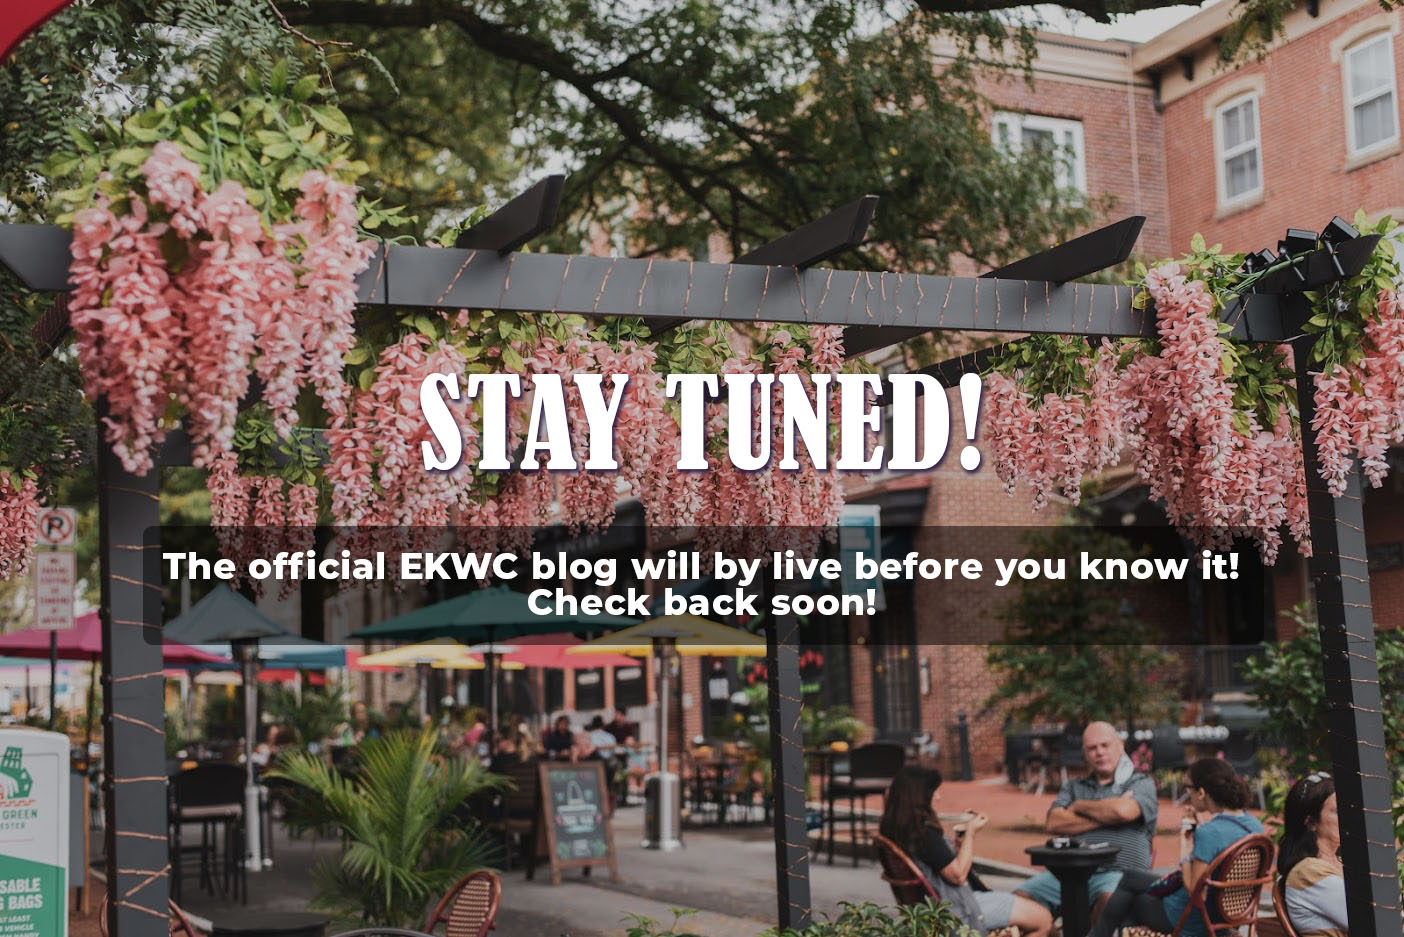 Check back soon for all the latest blog posts and happenings in West Chester!